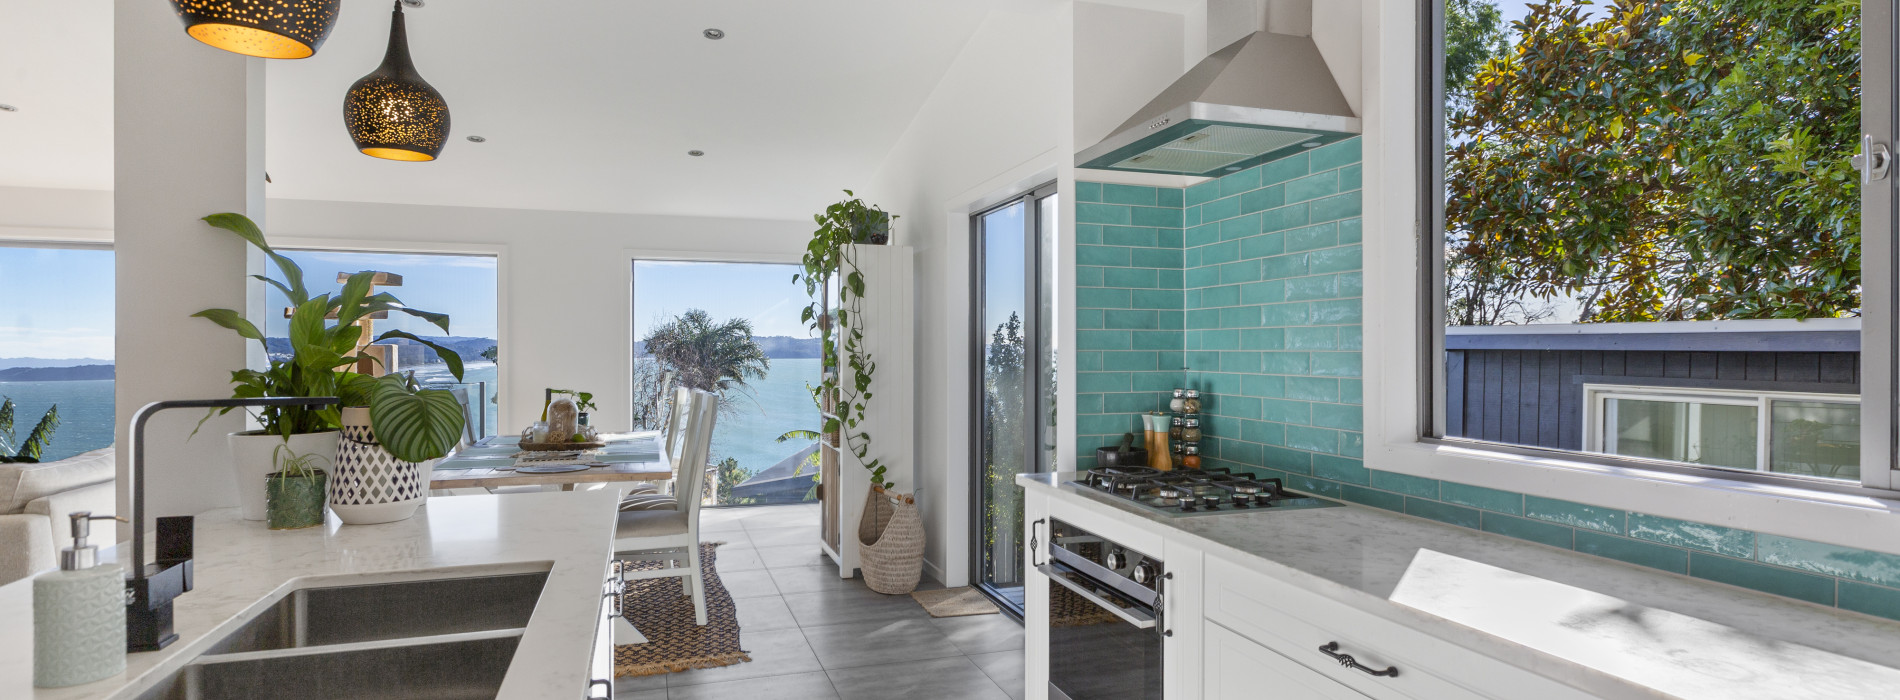 Kitchens auckland stanmore bay banner